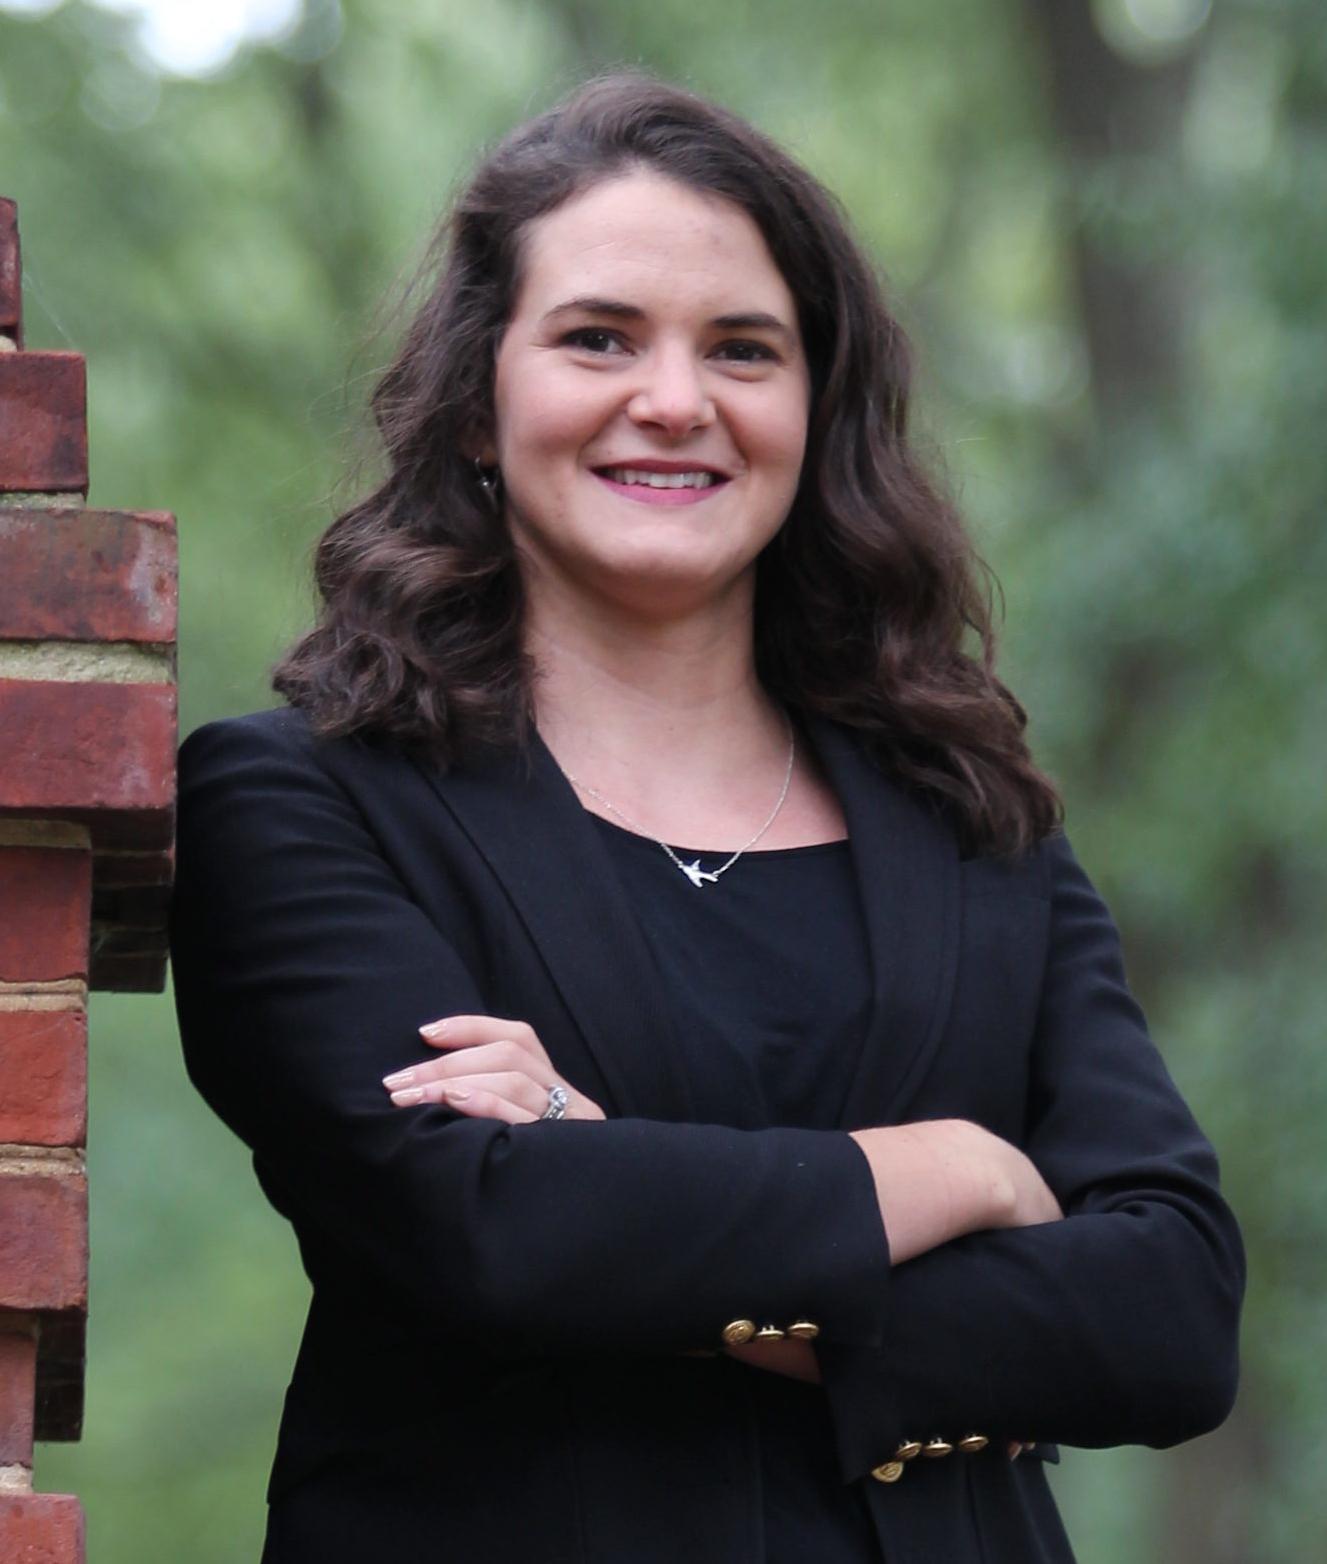 Allison Gost, alumna of the School of Public Health at the University of Maryland